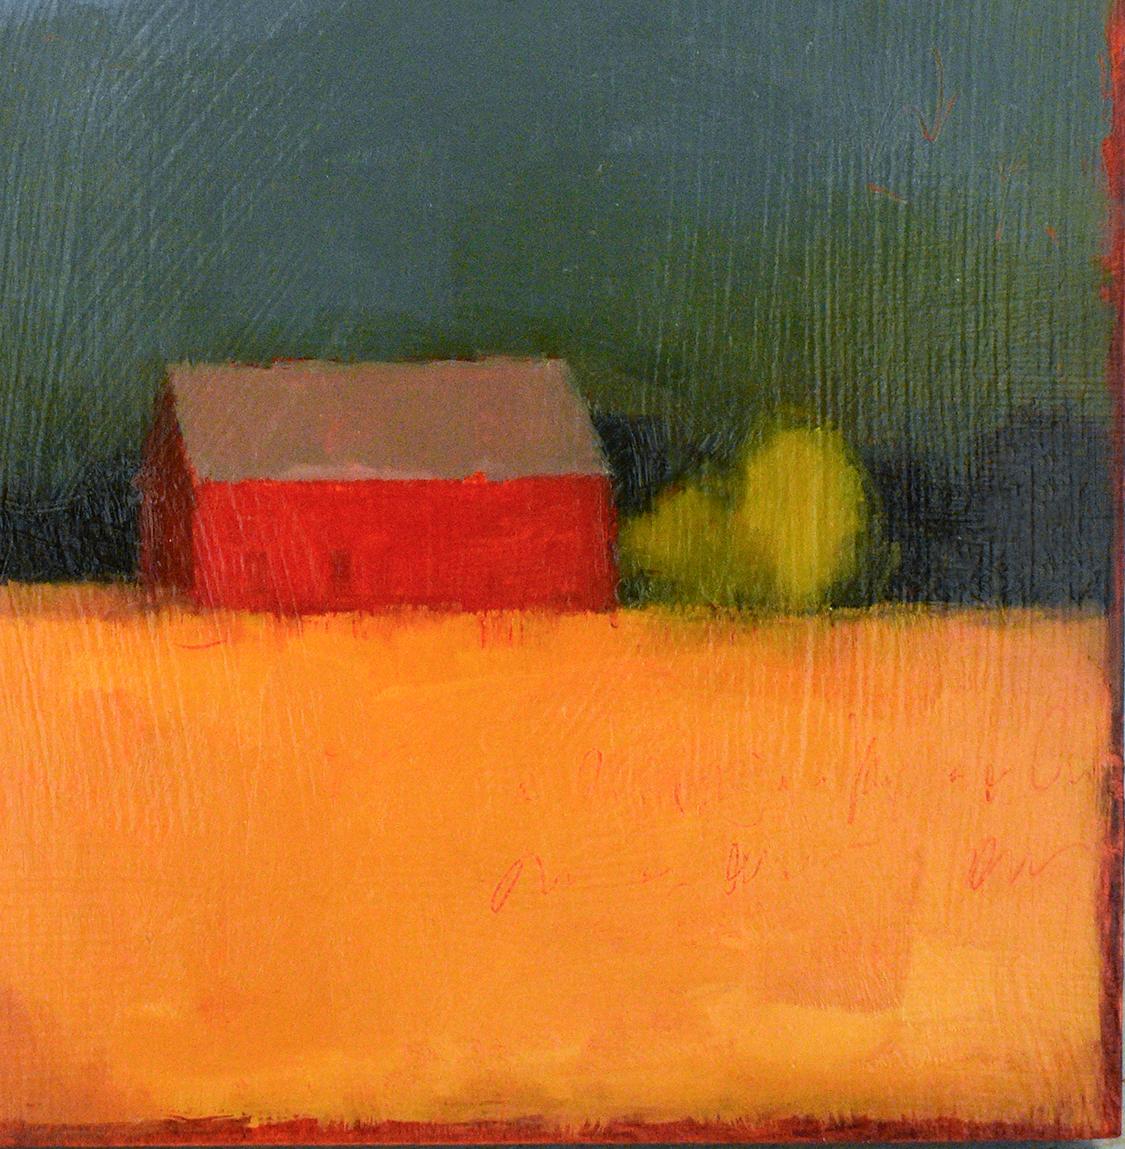 Minimal, abstracted landscape of a red barn, yellow and green field under a blue sky
oil on birch panel, 10 x 8 inches
Ready to hang as is, no frame required, edges of the panel are painted soft black
Artist signature located on the back

This